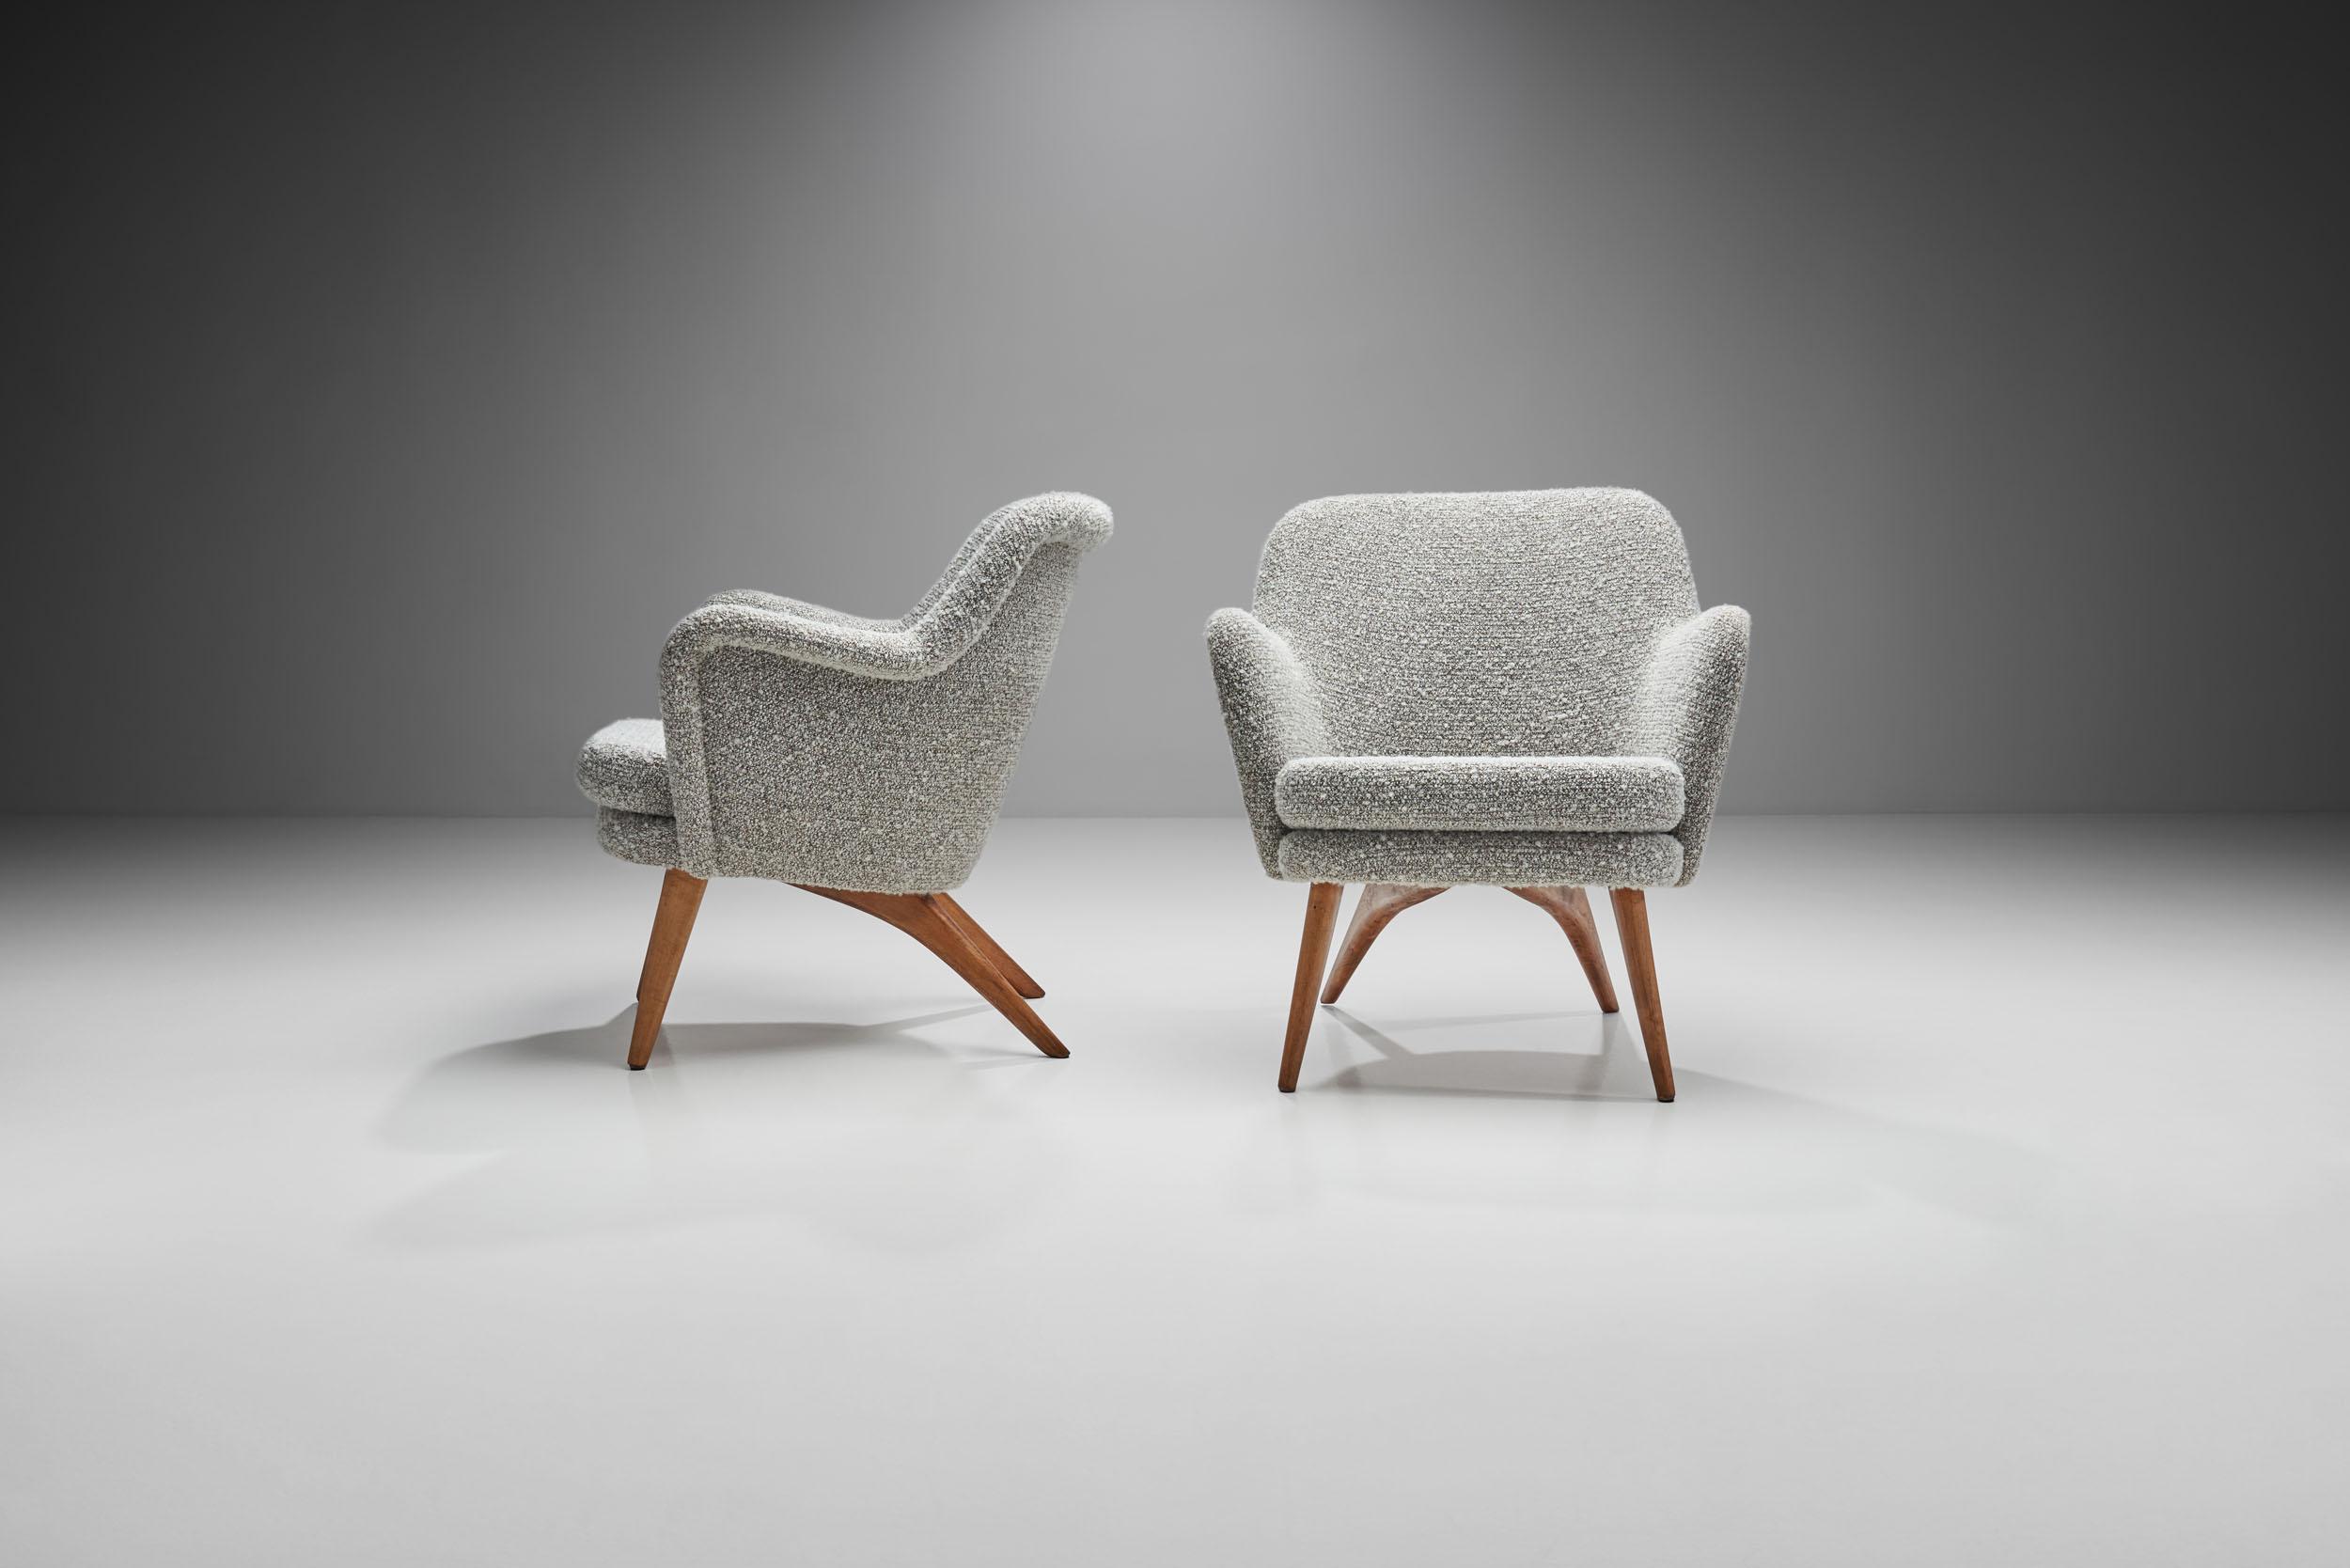 Scandinavian Modern Pair of “Pedro” Armchairs by Carl Gustaf Hiort, Finland 1950s For Sale